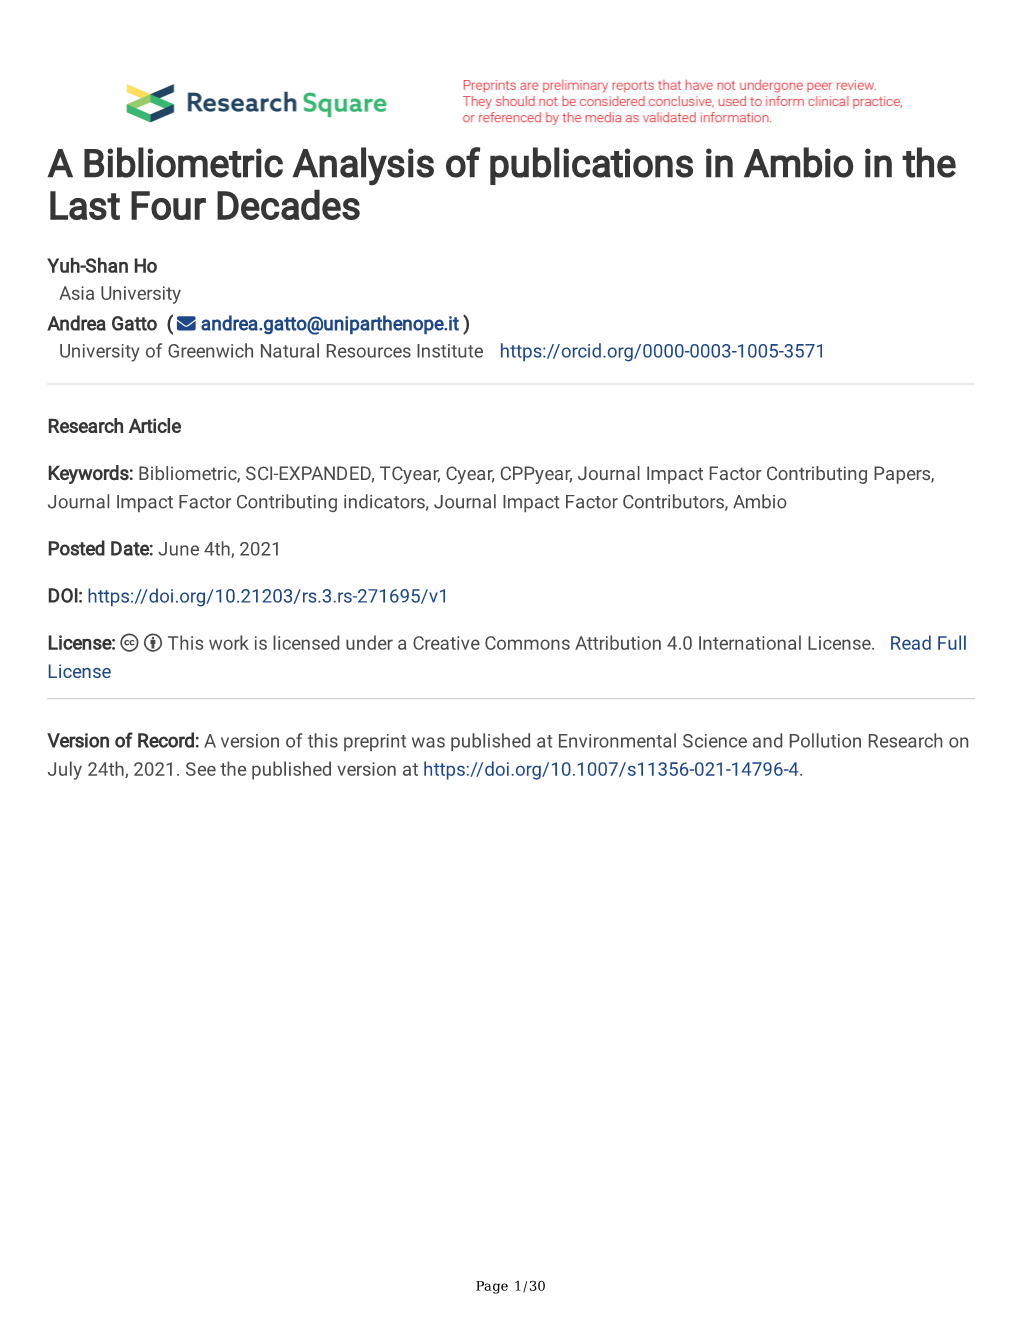 A Bibliometric Analysis of Publications in Ambio in the Last Four Decades